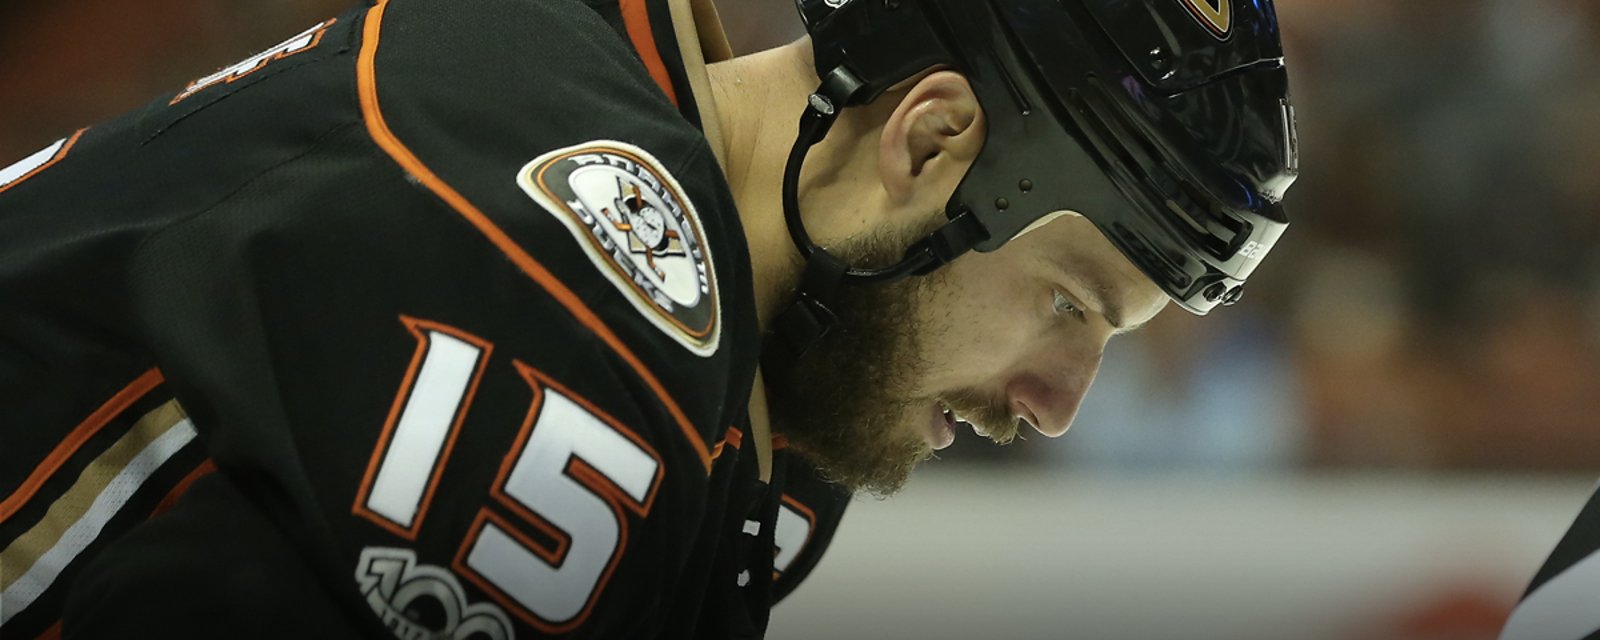 Injury report: Getzlaf out with injury